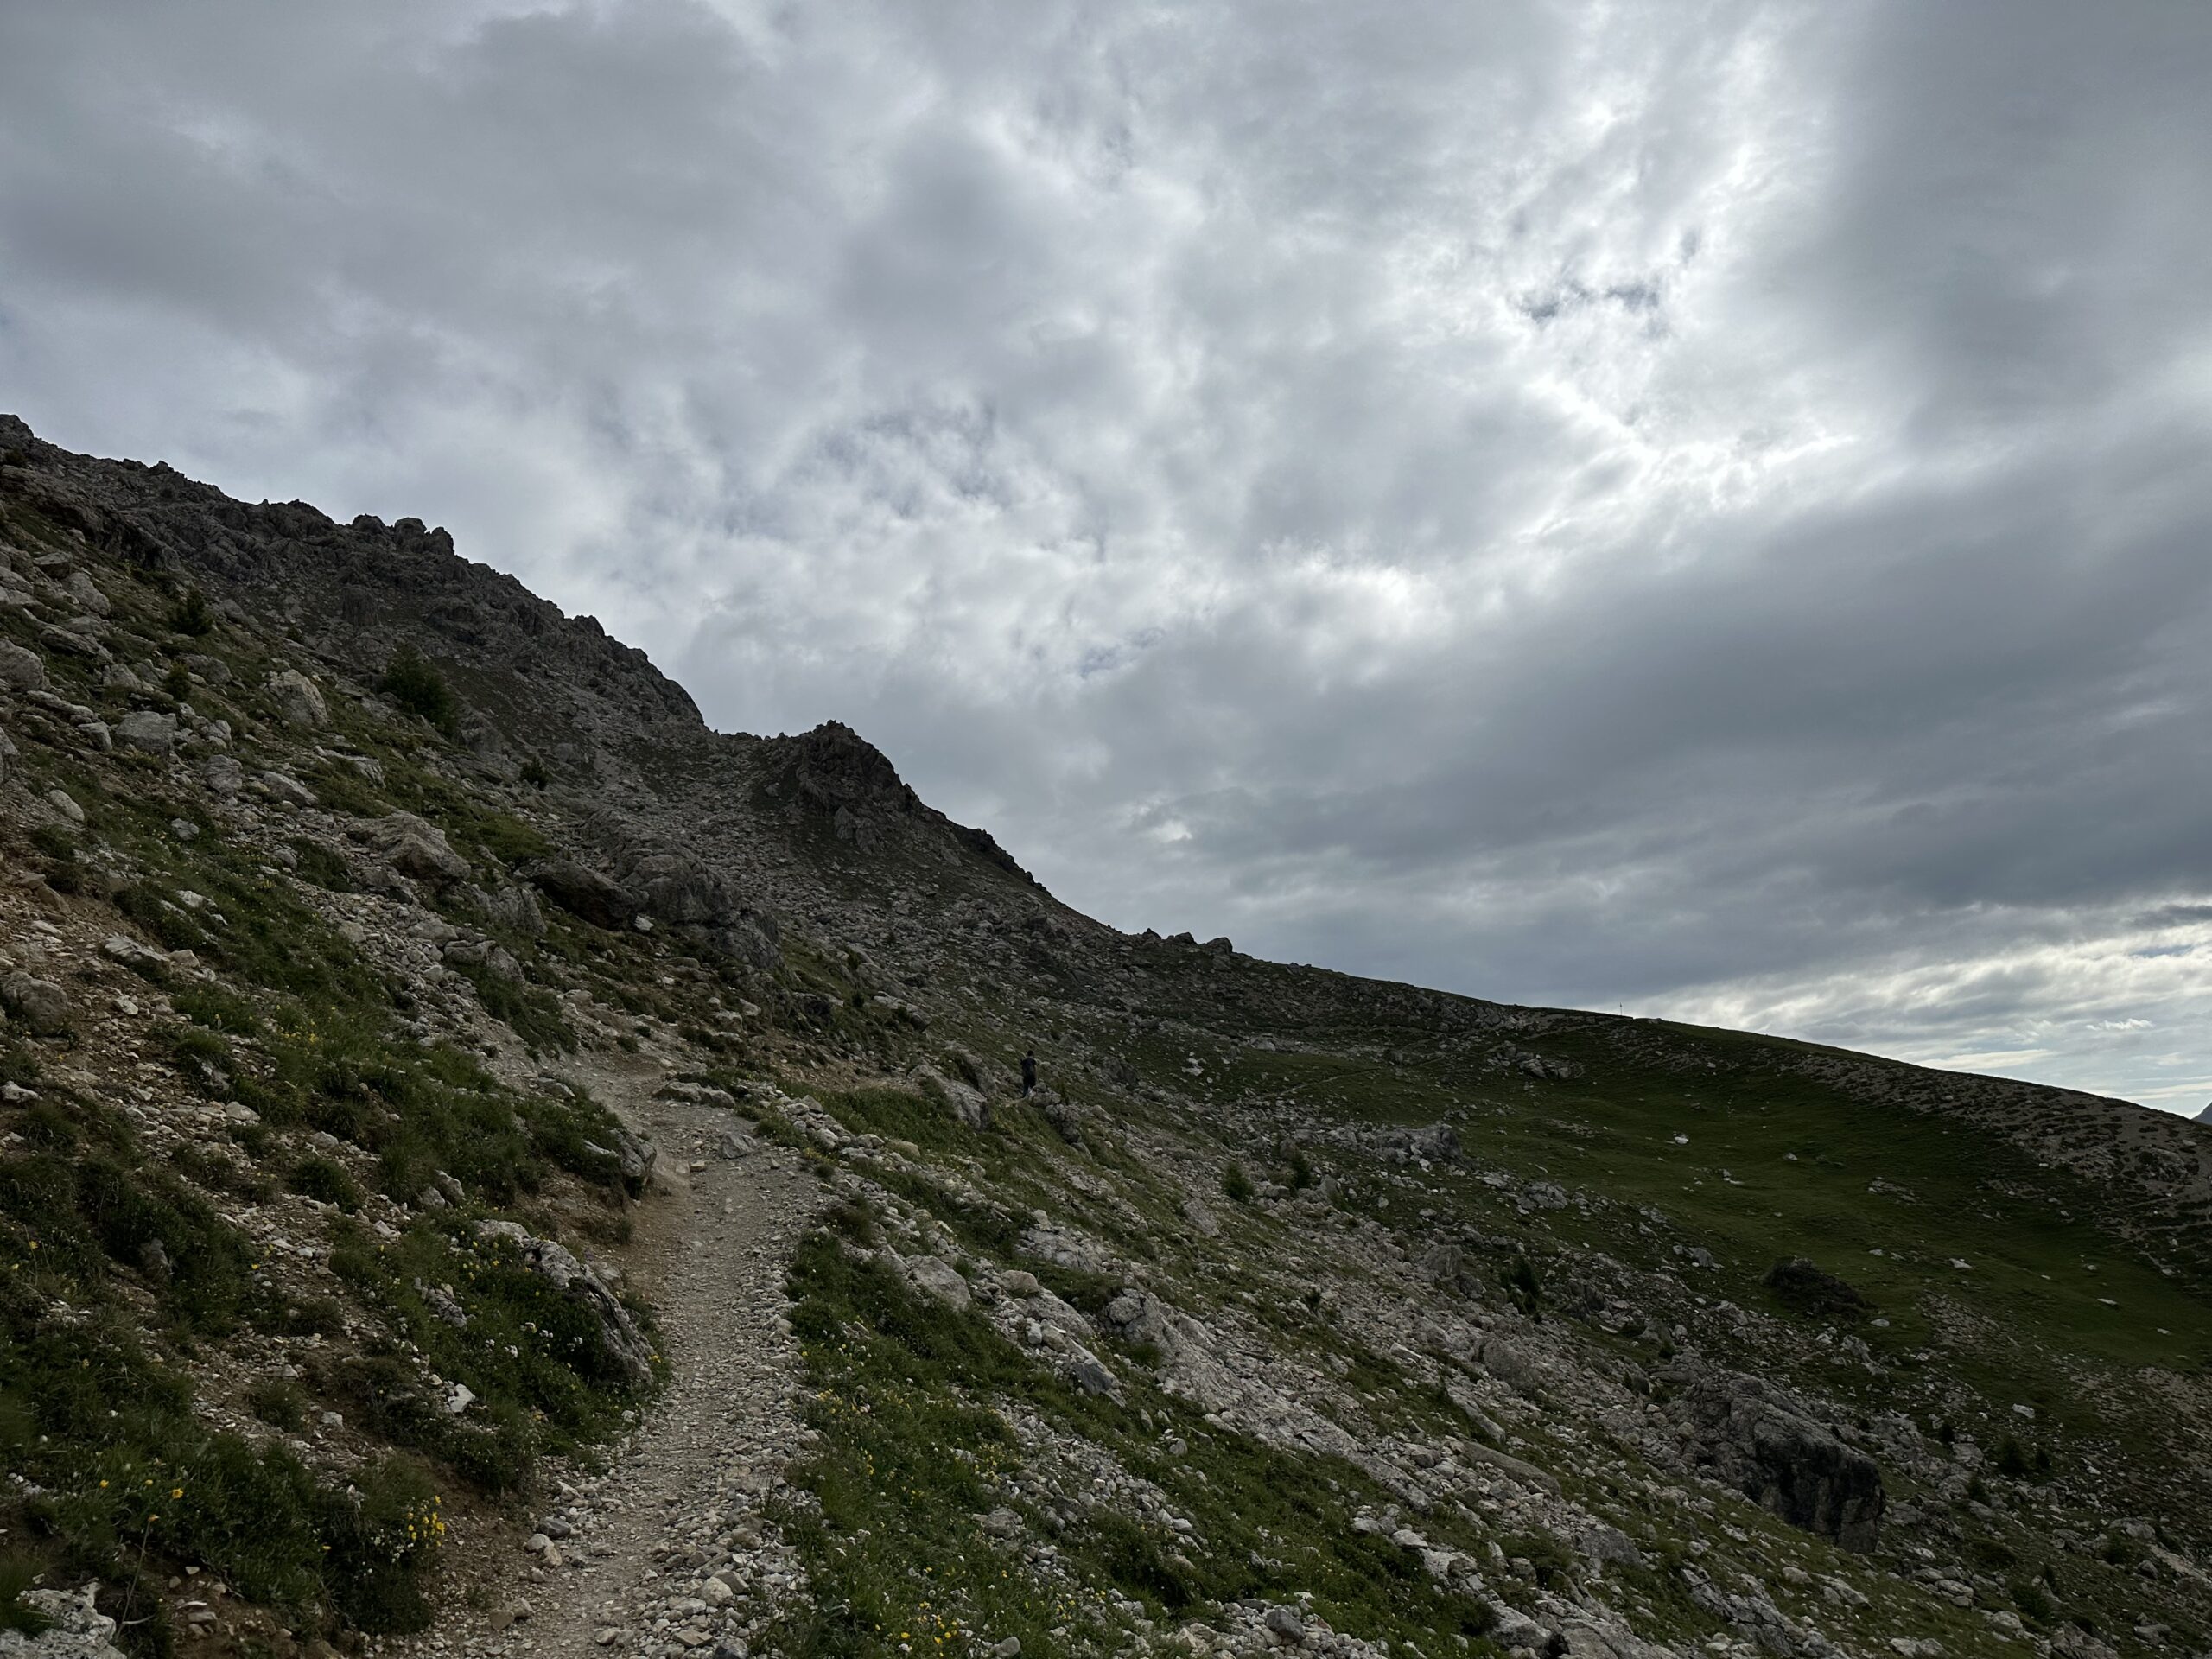 View of hiking trail across high alpine terrain, rocky and grassy, under a cloudy sky.